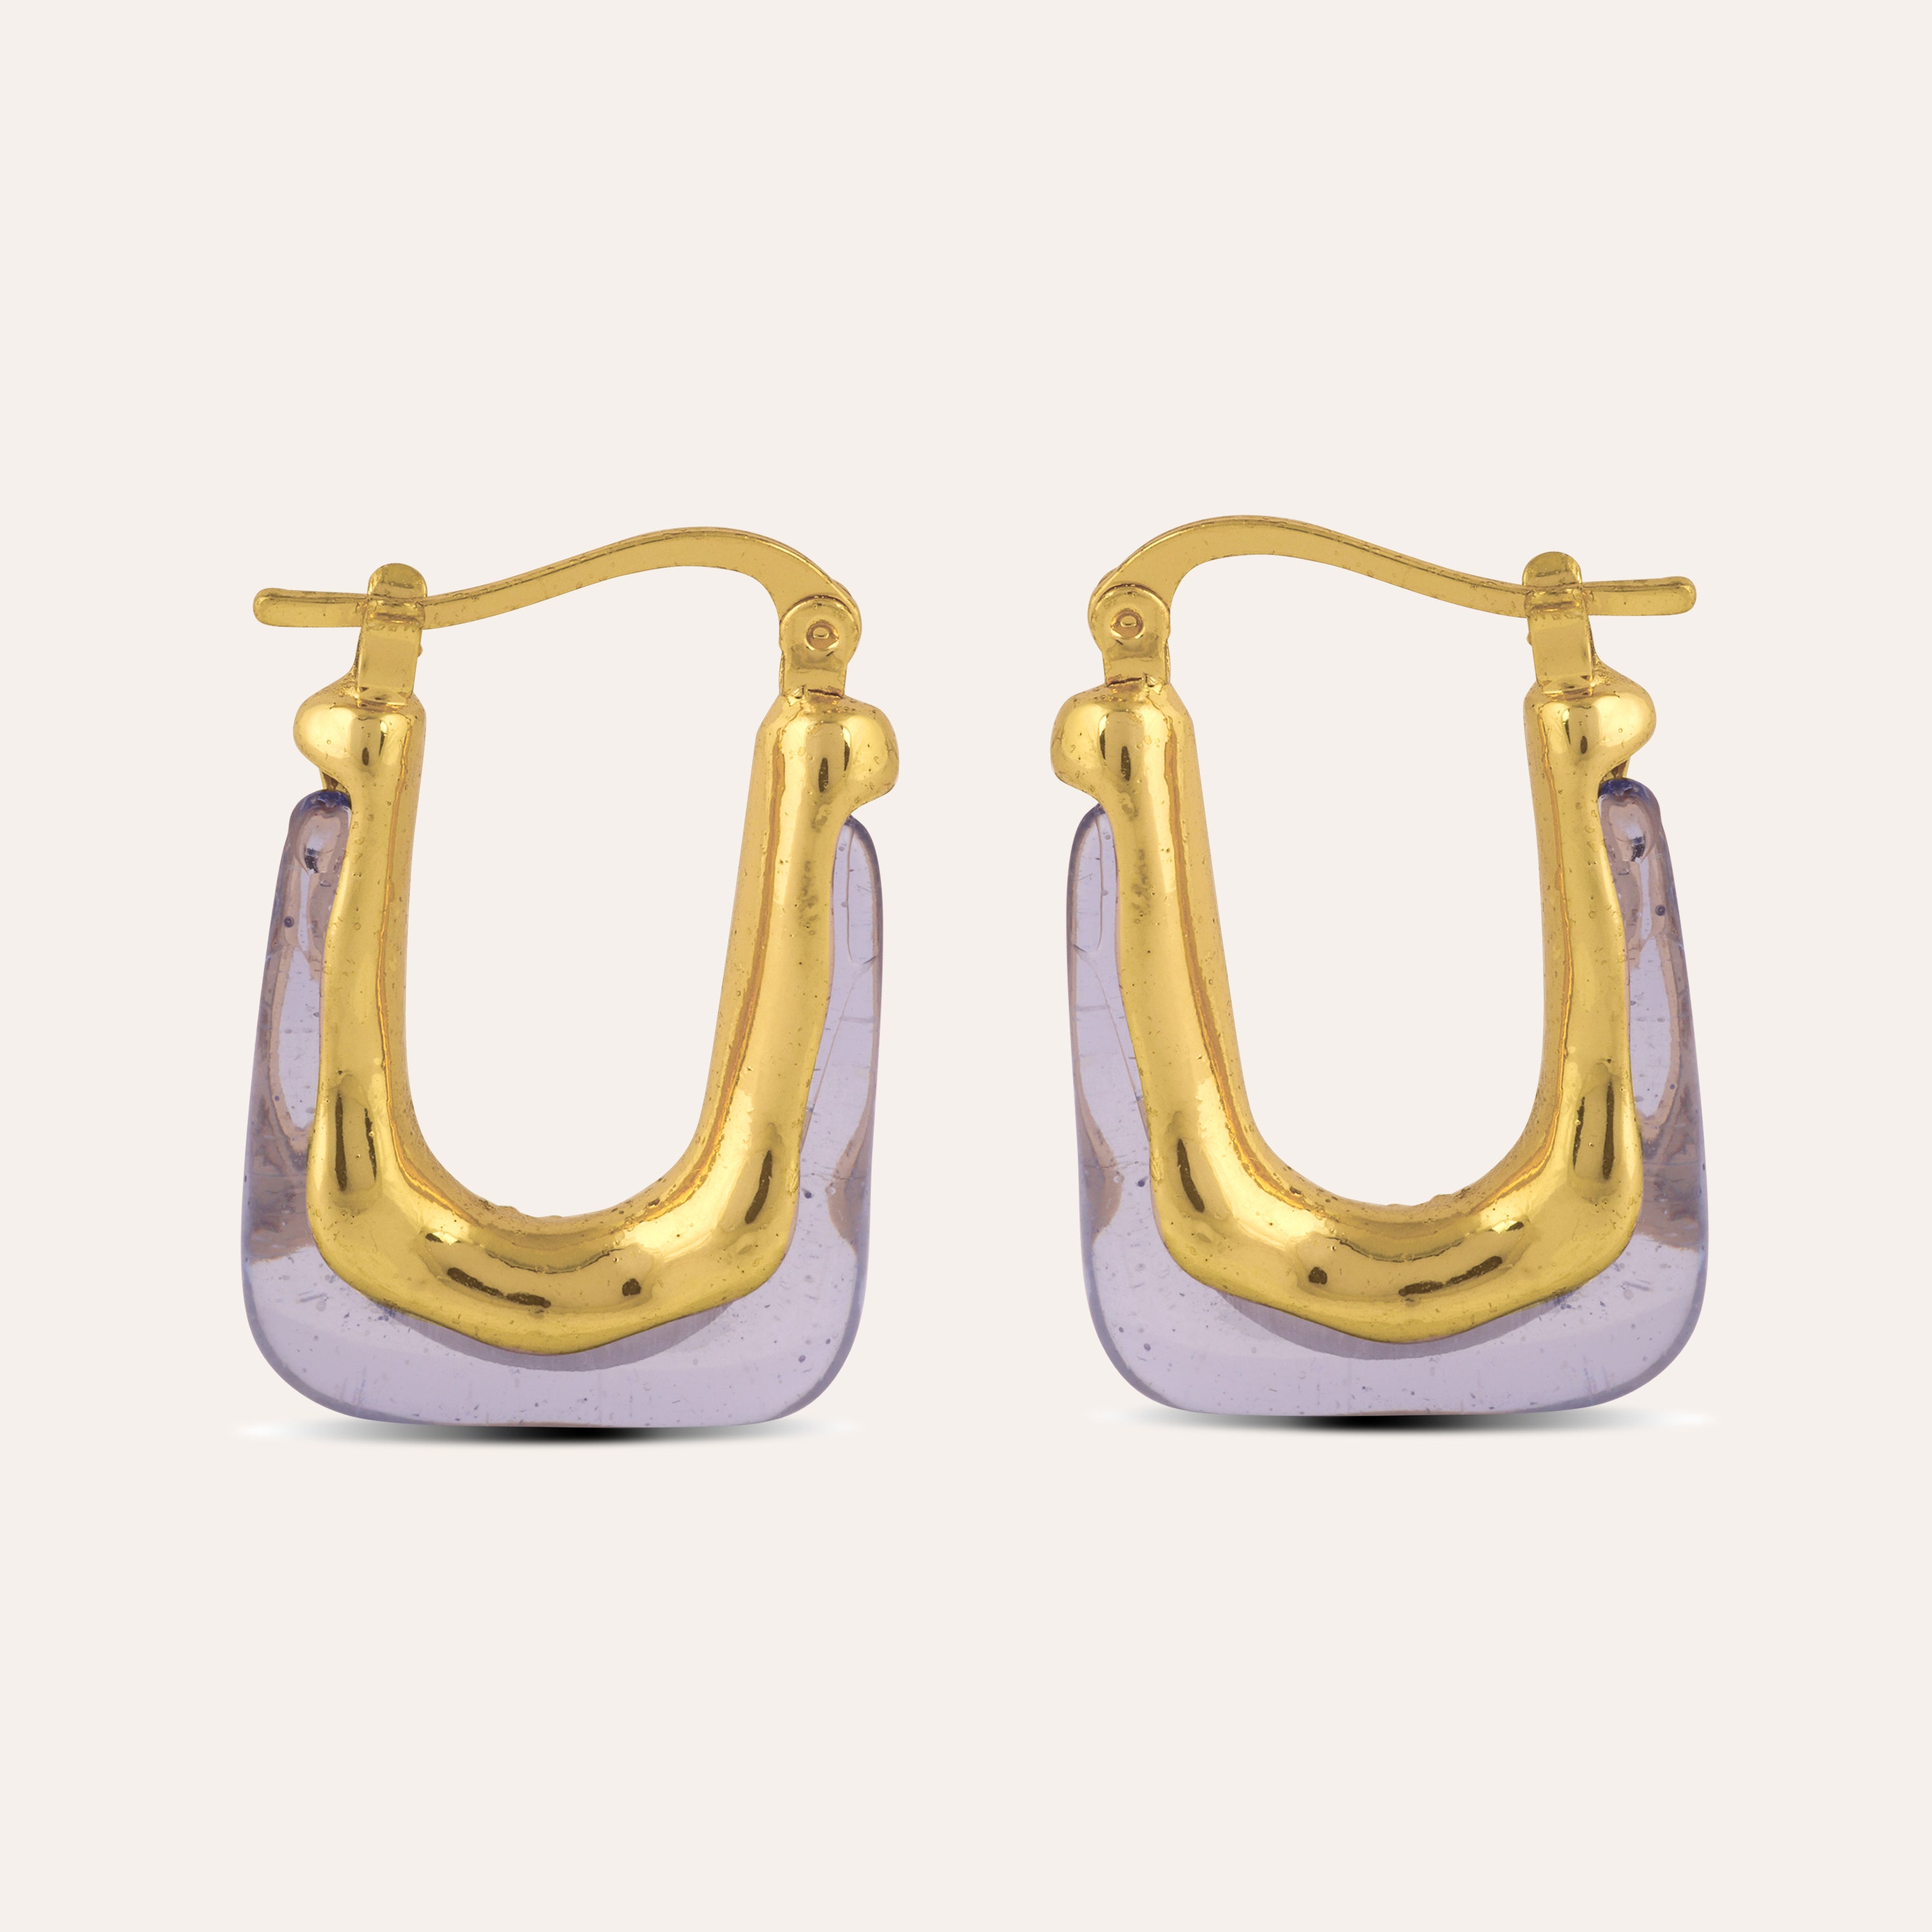 TFC Square White Resin Gold Plated Hoop Earrings- Discover daily wear gold earrings including stud earrings, hoop earrings, and pearl earrings, perfect as earrings for women and earrings for girls.Find the cheapest fashion jewellery which is anti-tarnis​h only at The Fun company